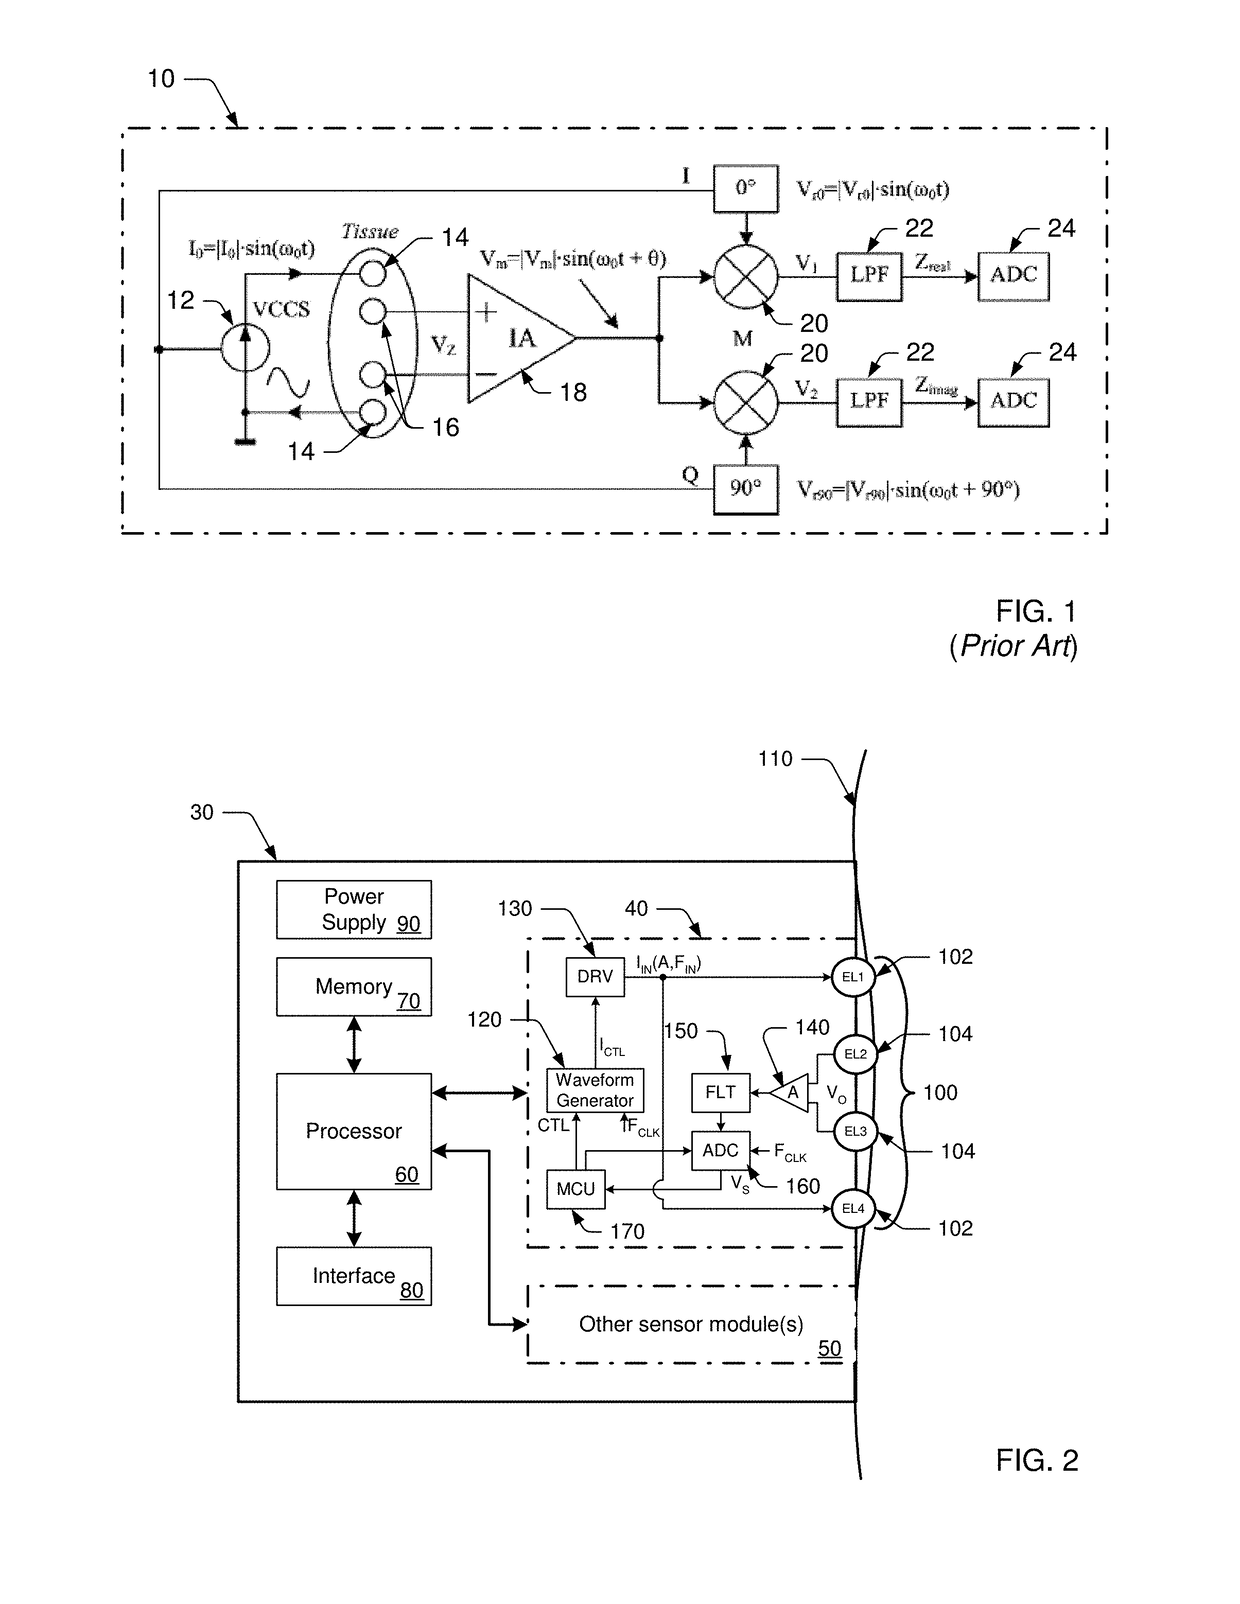 Synchronous Detection Circuit And Method For Determining A Bio-Impedance Of A Biological Tissue